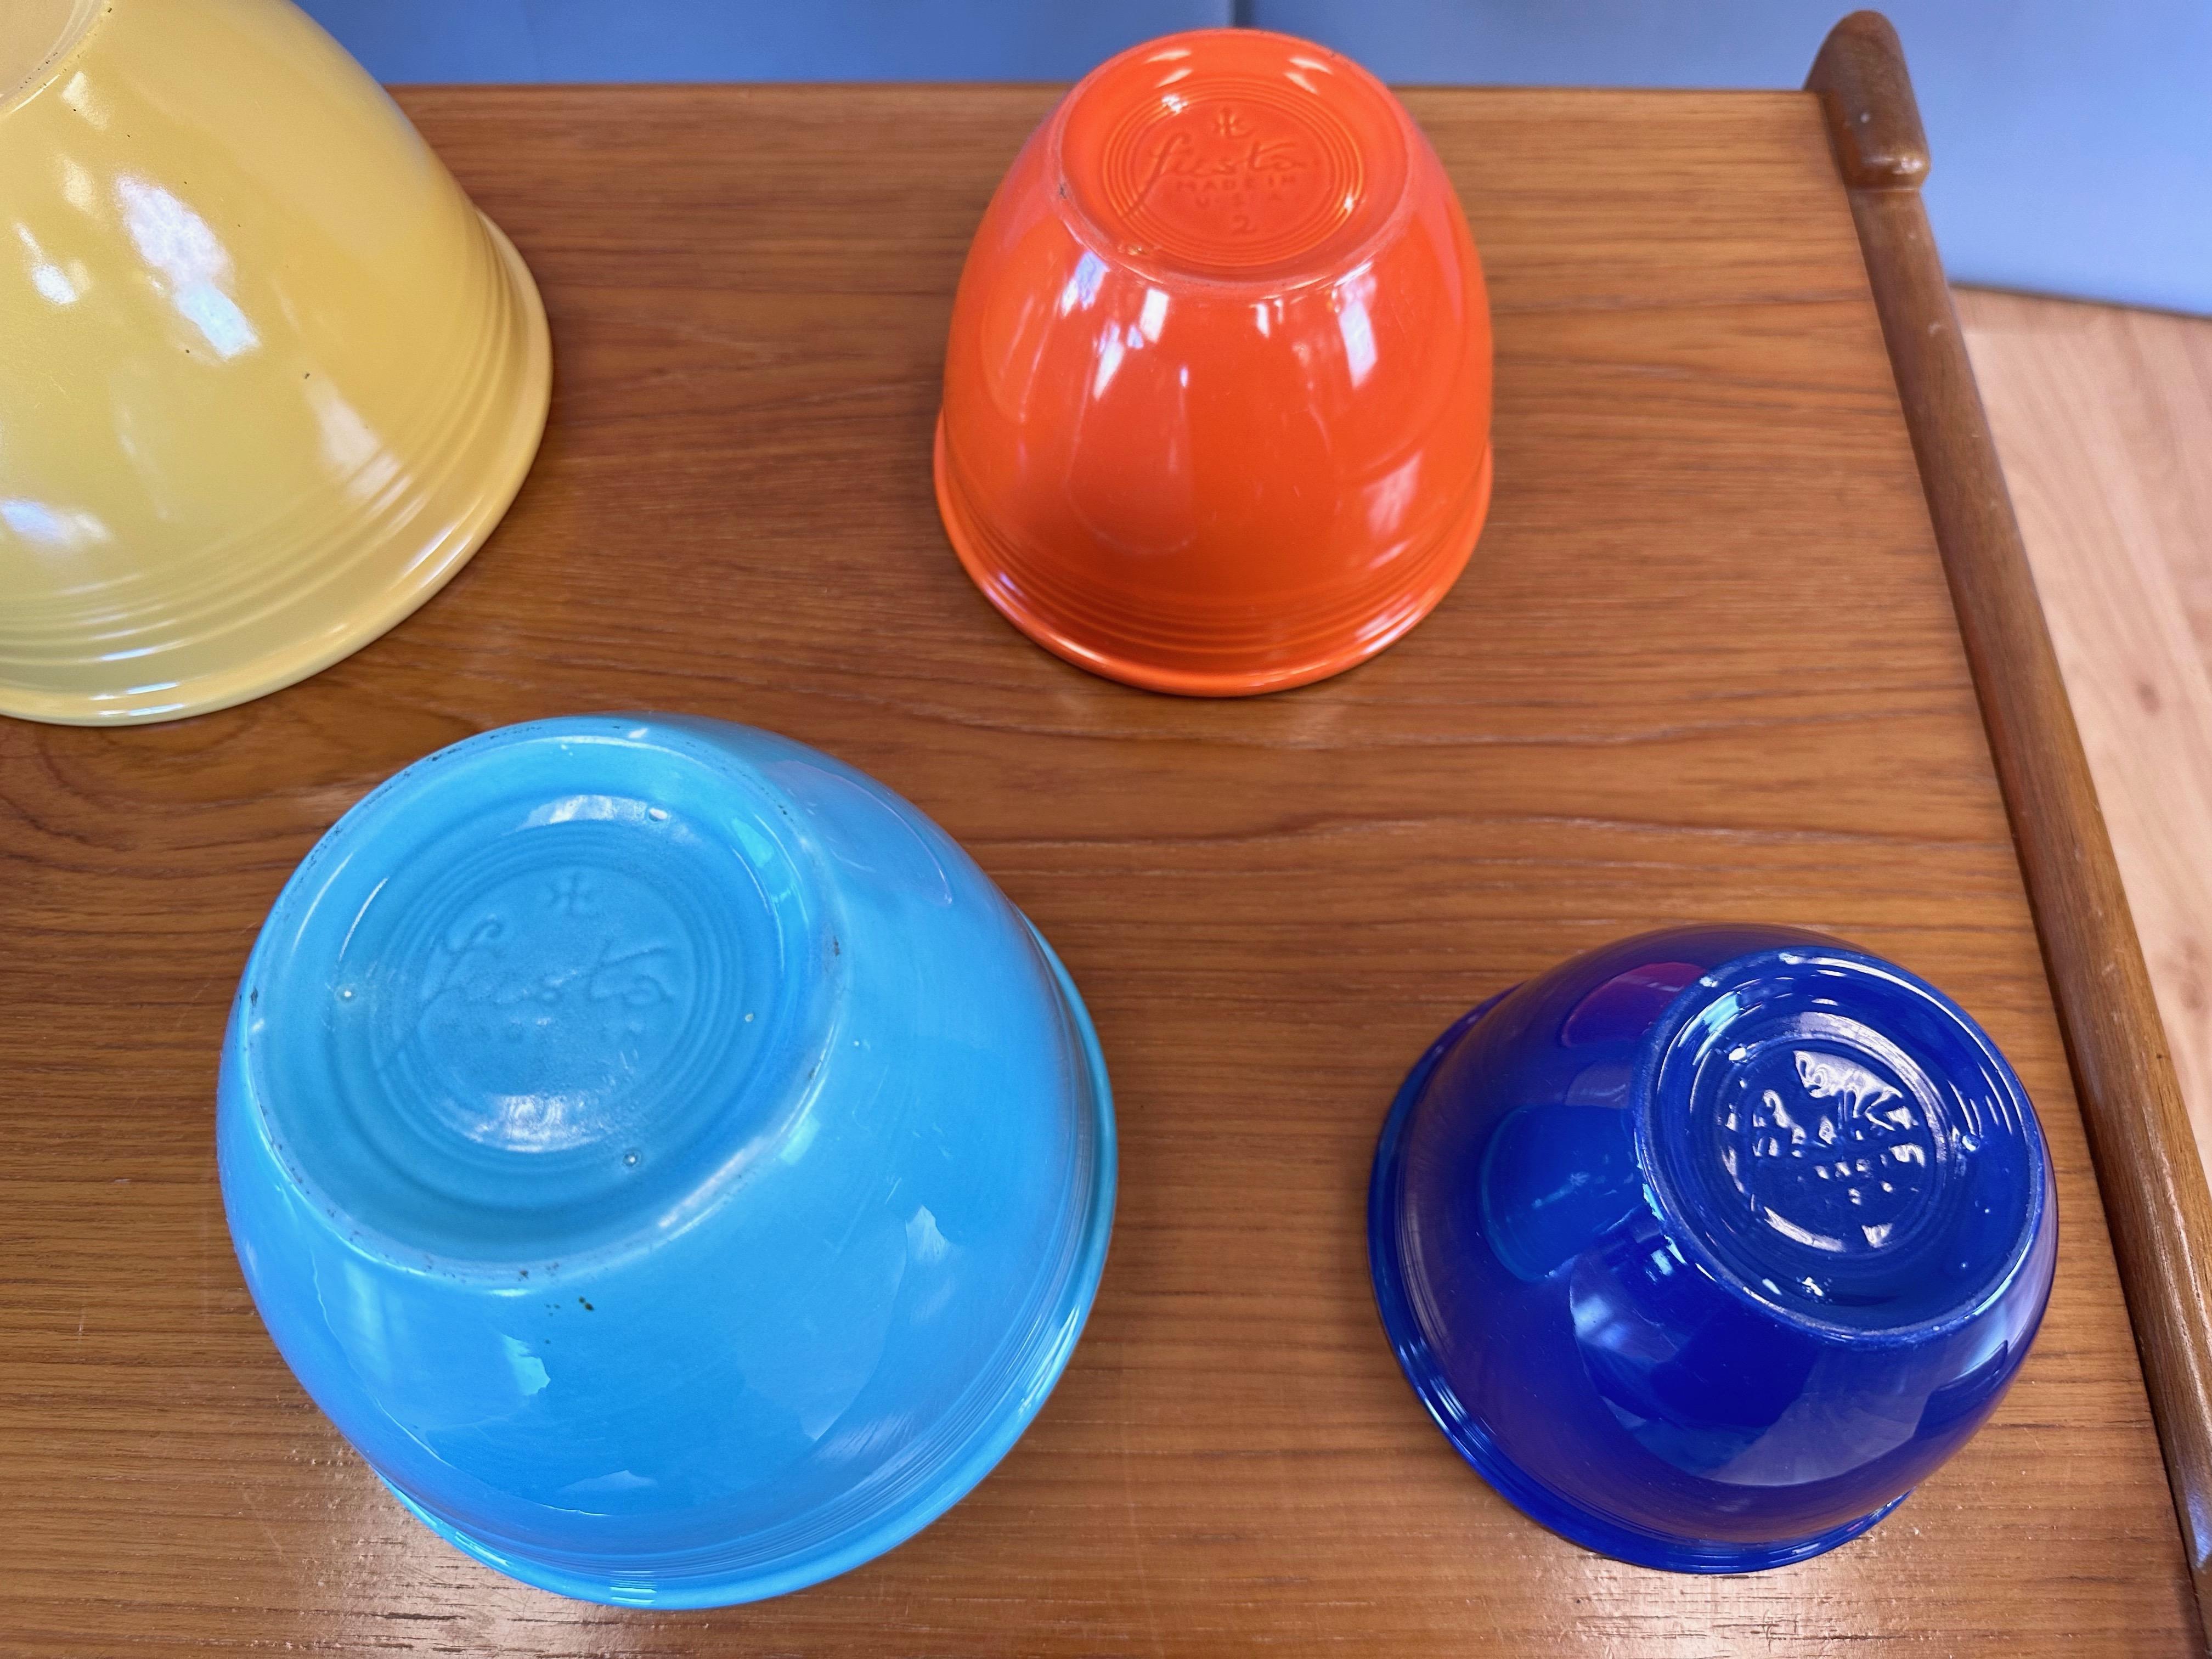 Early Vintage Fiestaware Nesting Mixing Bowls, Multi-Color Set of Six, c. 1940 For Sale 9